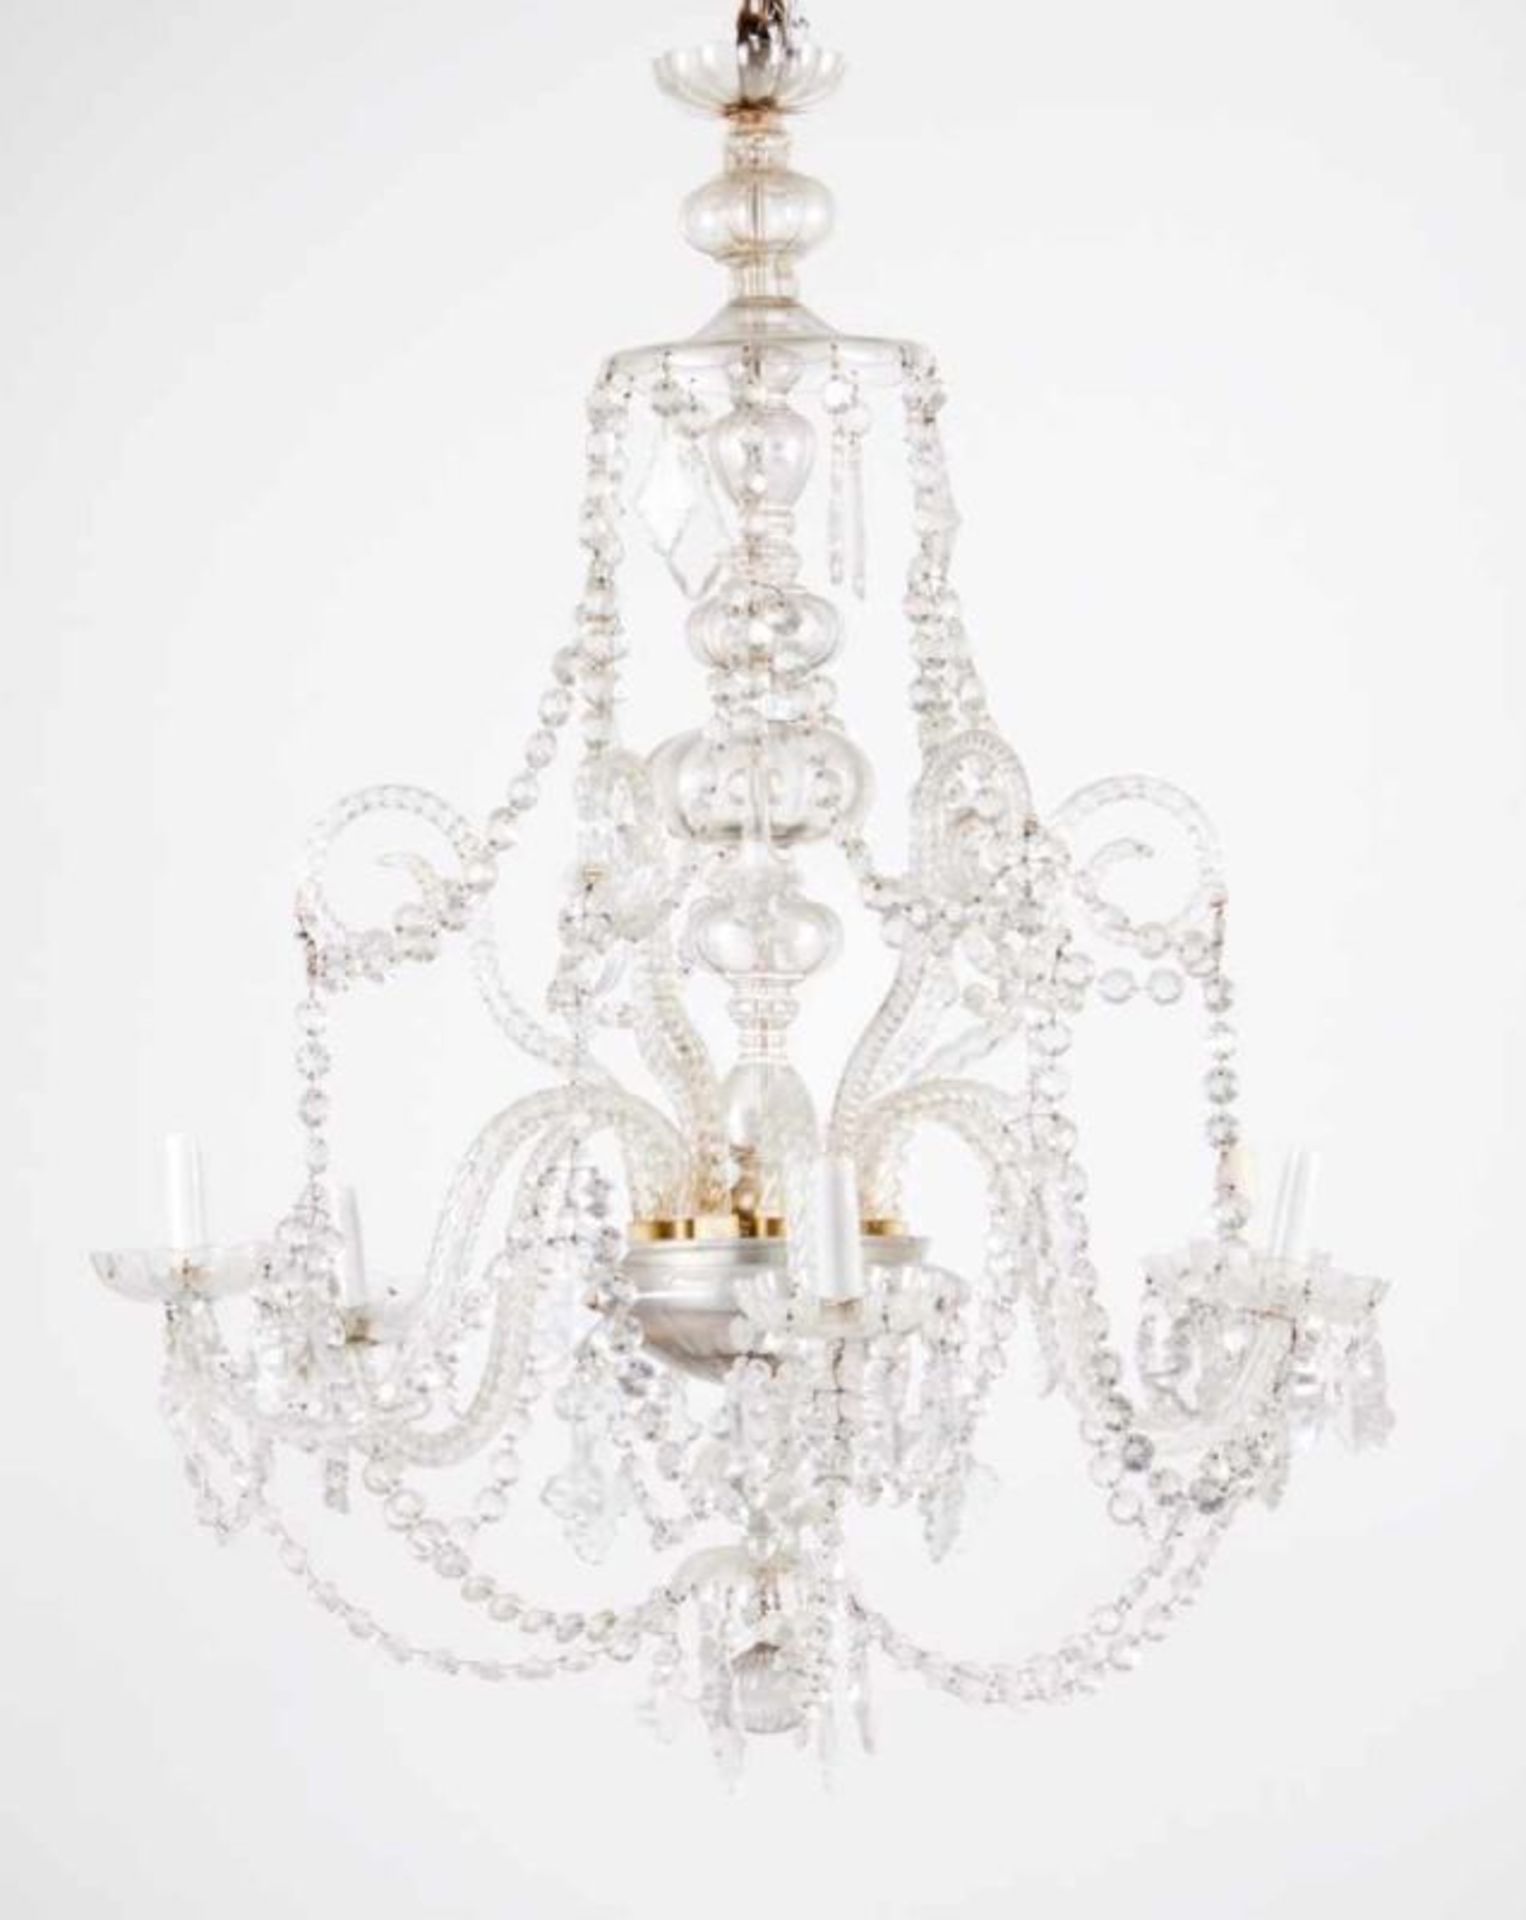 A six-light chandelier Glass and crystal (losses and small defects) 100x80 cm